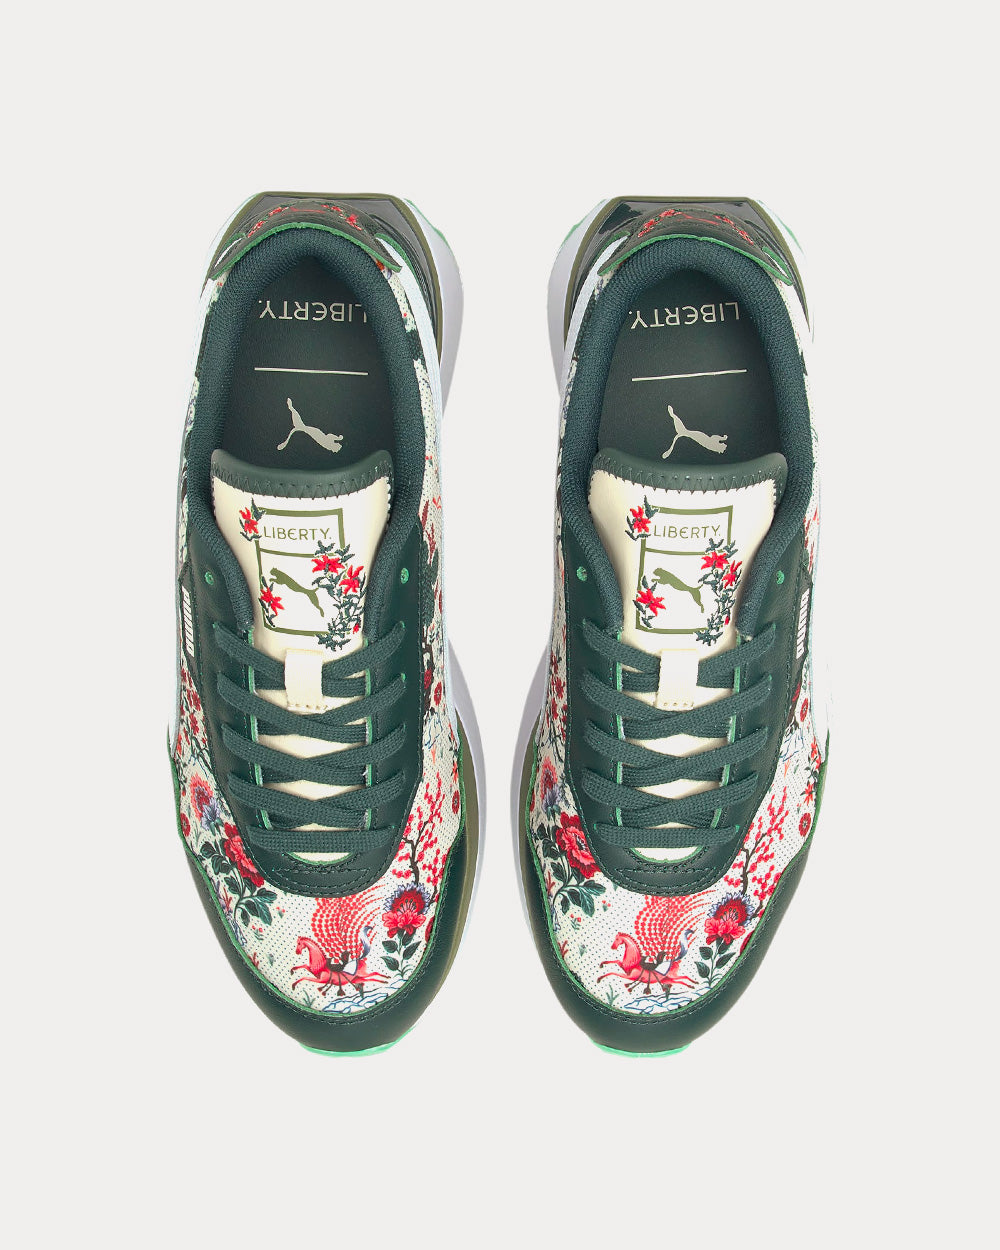 Puma x Liberty - Cruise Rider NU Green Gables / Puma White Low Top Sneakers